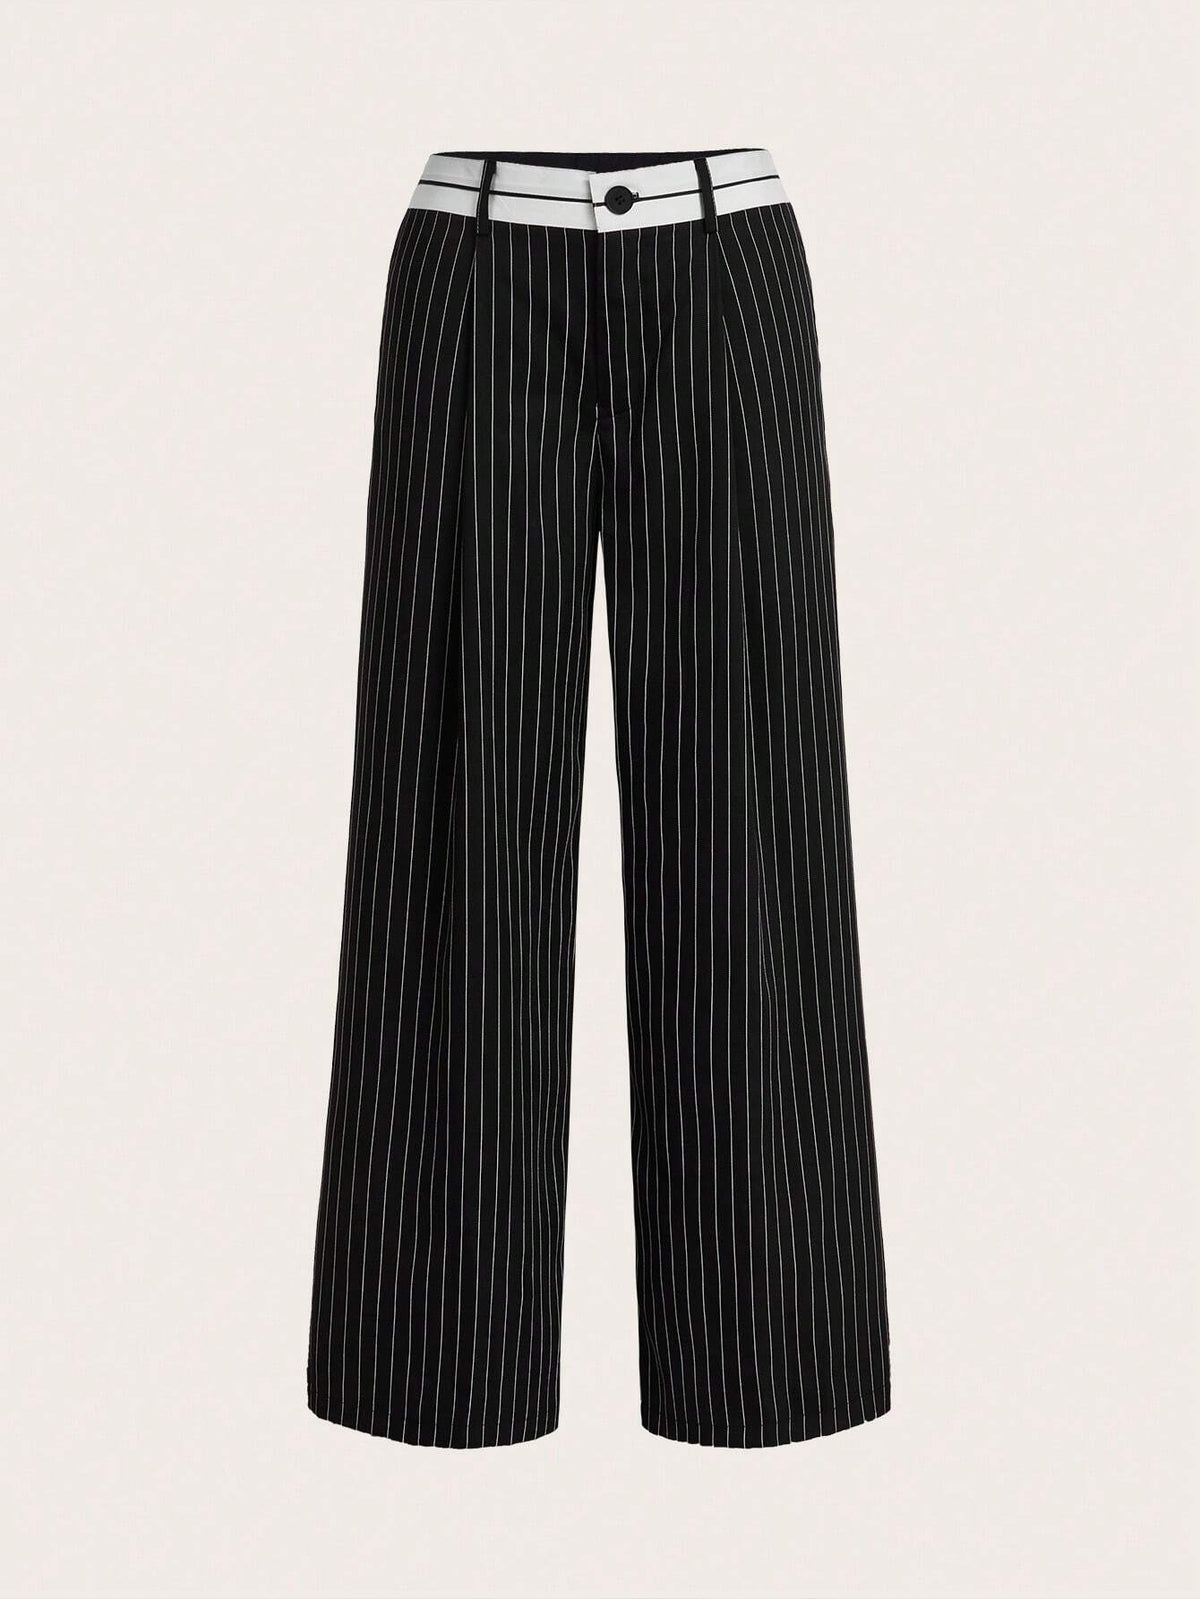 EZwear Casual Color Block Striped Straight Pants